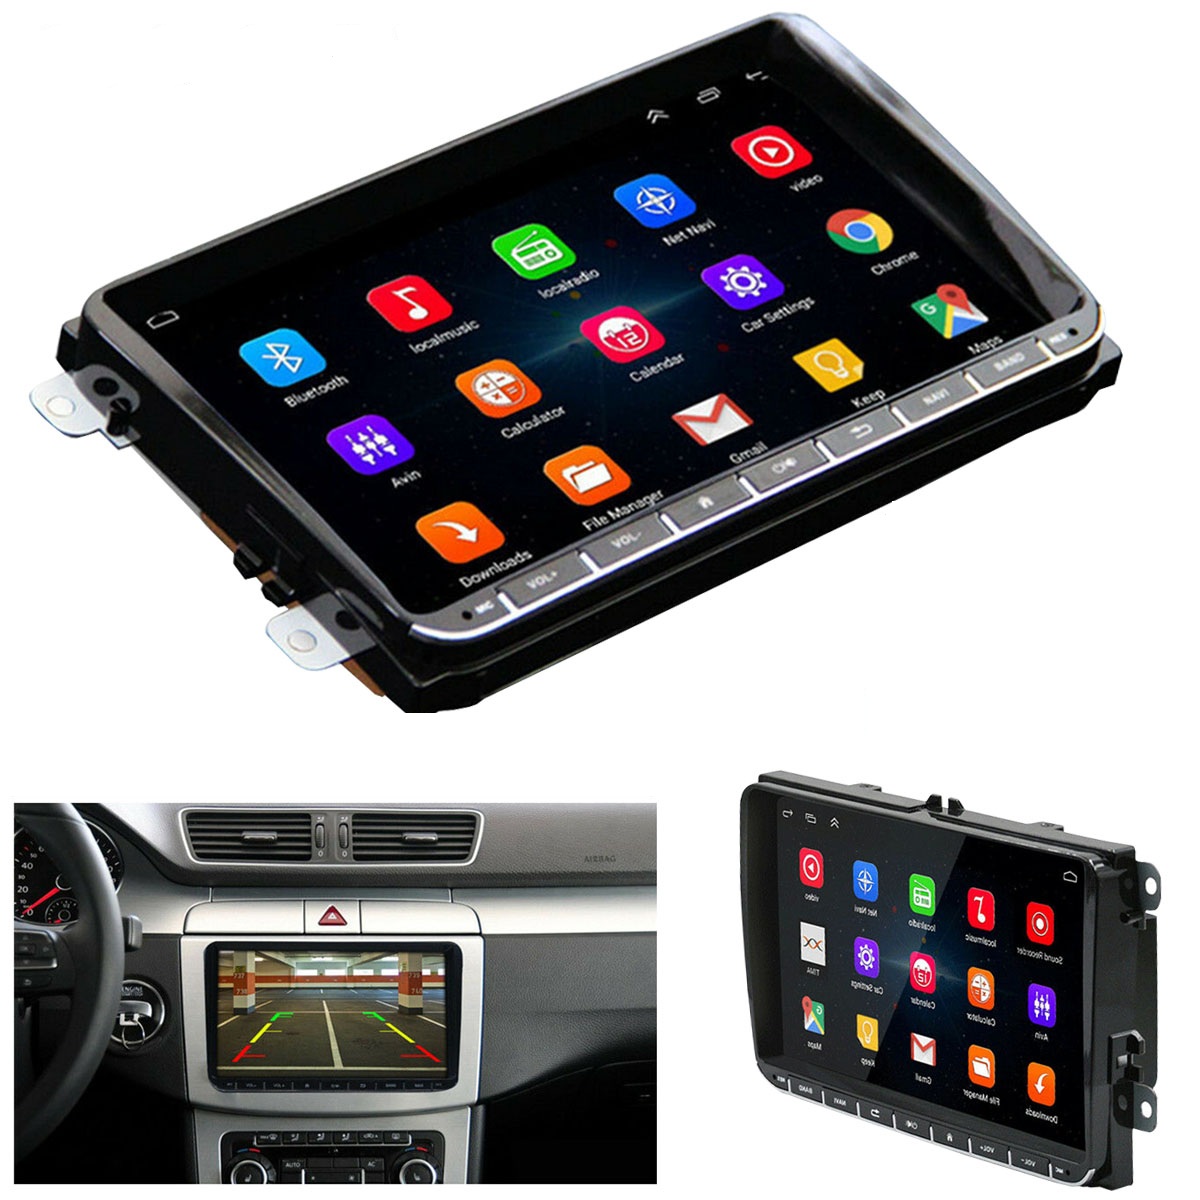 

9 Inch 2DIN for Android 8.1 HD Car Multimedia Player Quad Core 1G+16G Touch Screen Car Radio Stereo bluetooth FM AM DAB DTV USB for VW/Skoda Seat